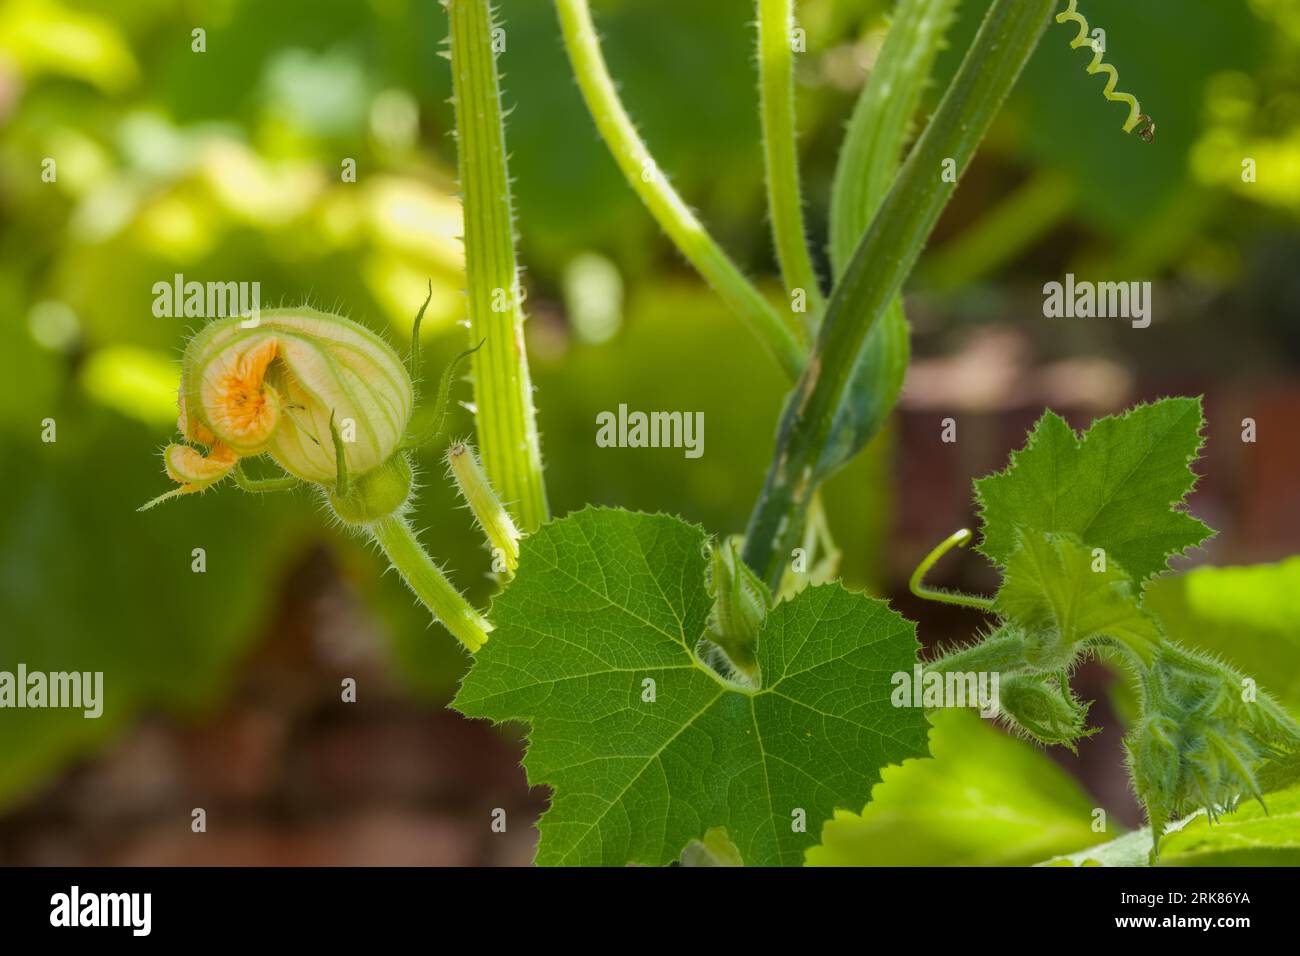 close up of a green bottle gourd flower in summer sunshine Stock Photo